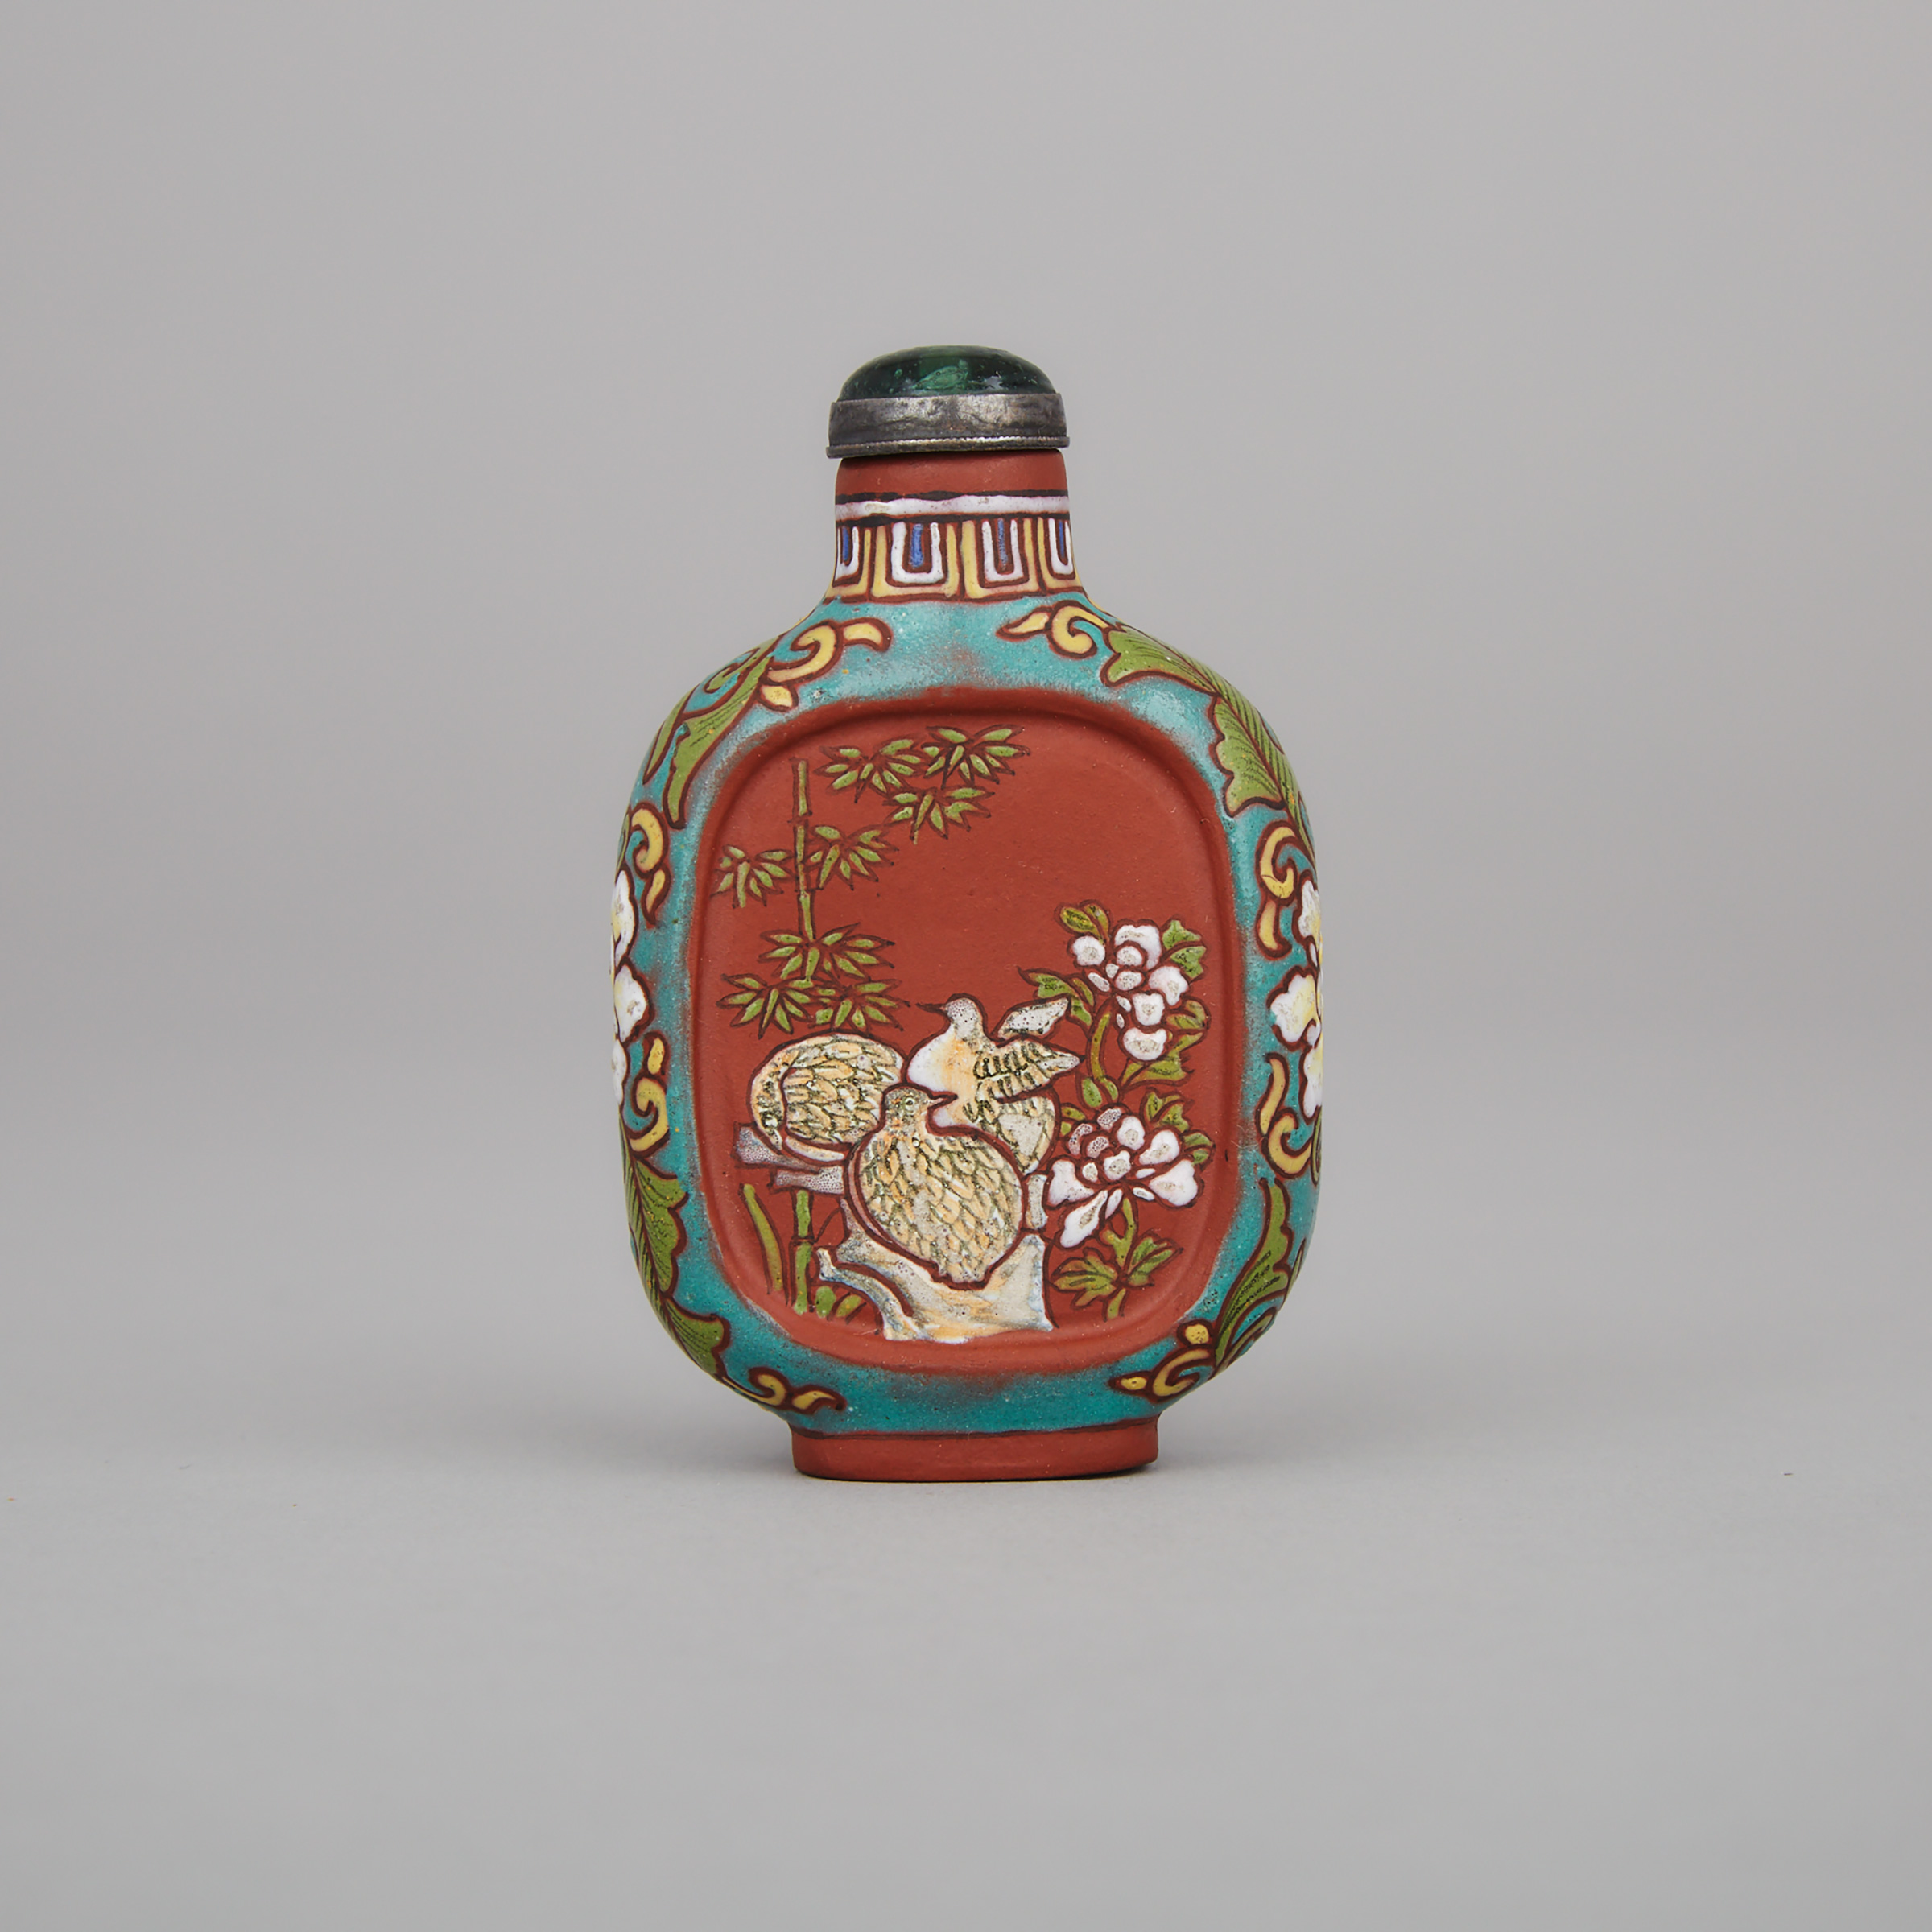 A Rare Enamel and White-Slip Decorated Yixing Stoneware Snuff Bottle, 19th Century